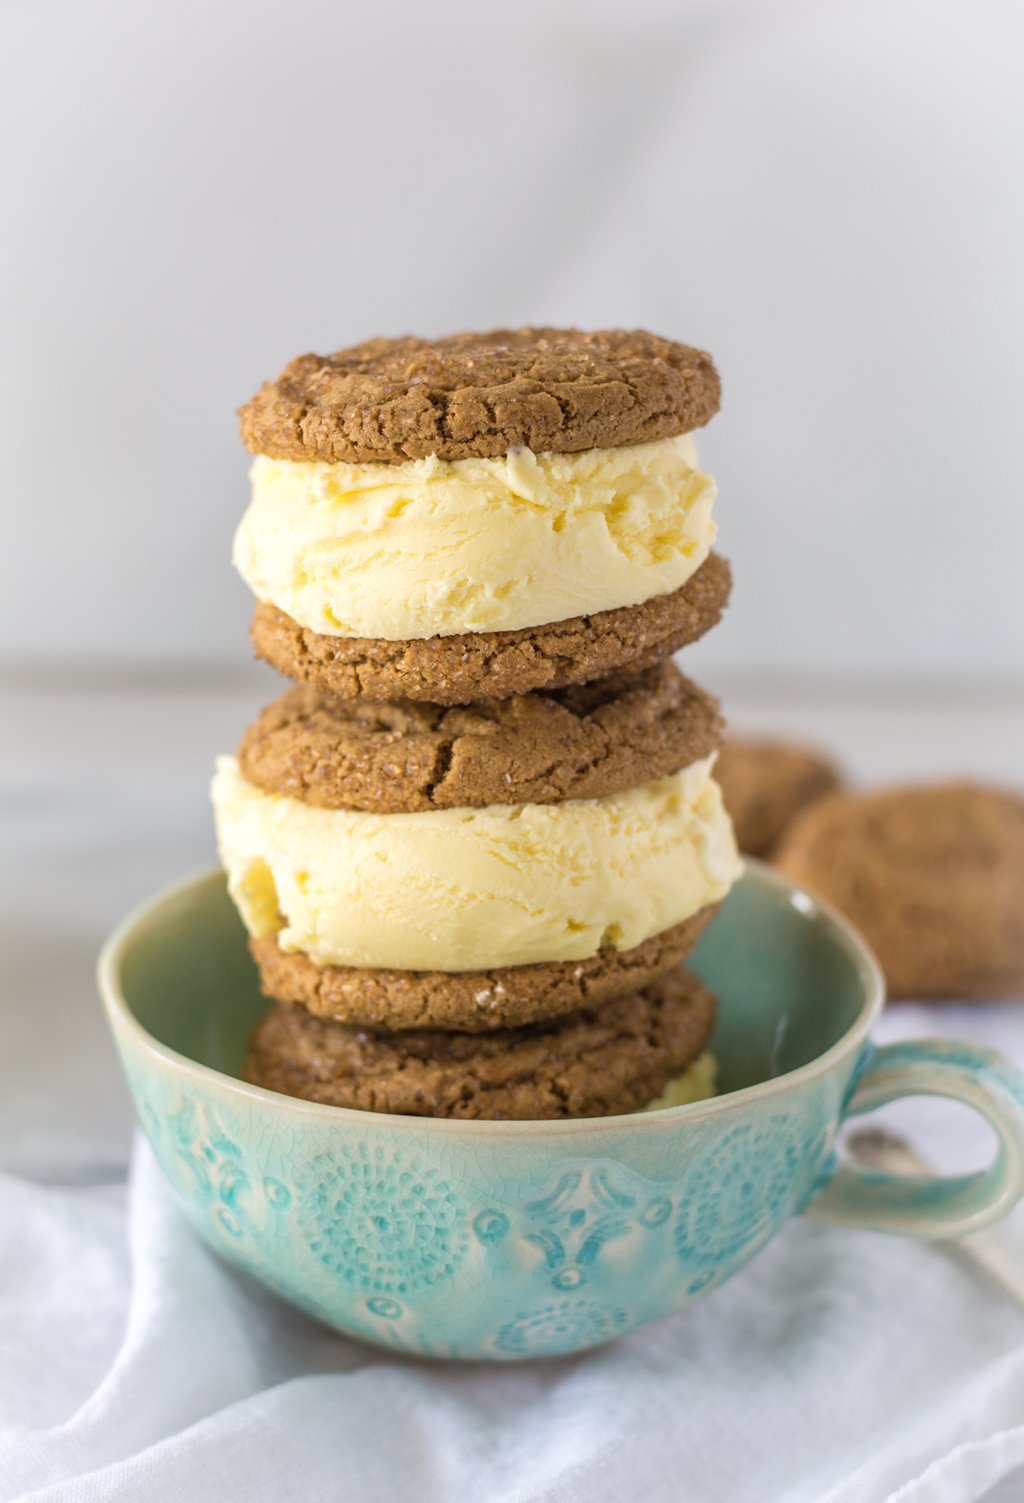 stacked lemon curd ice cream sandwiches in a green tea cup